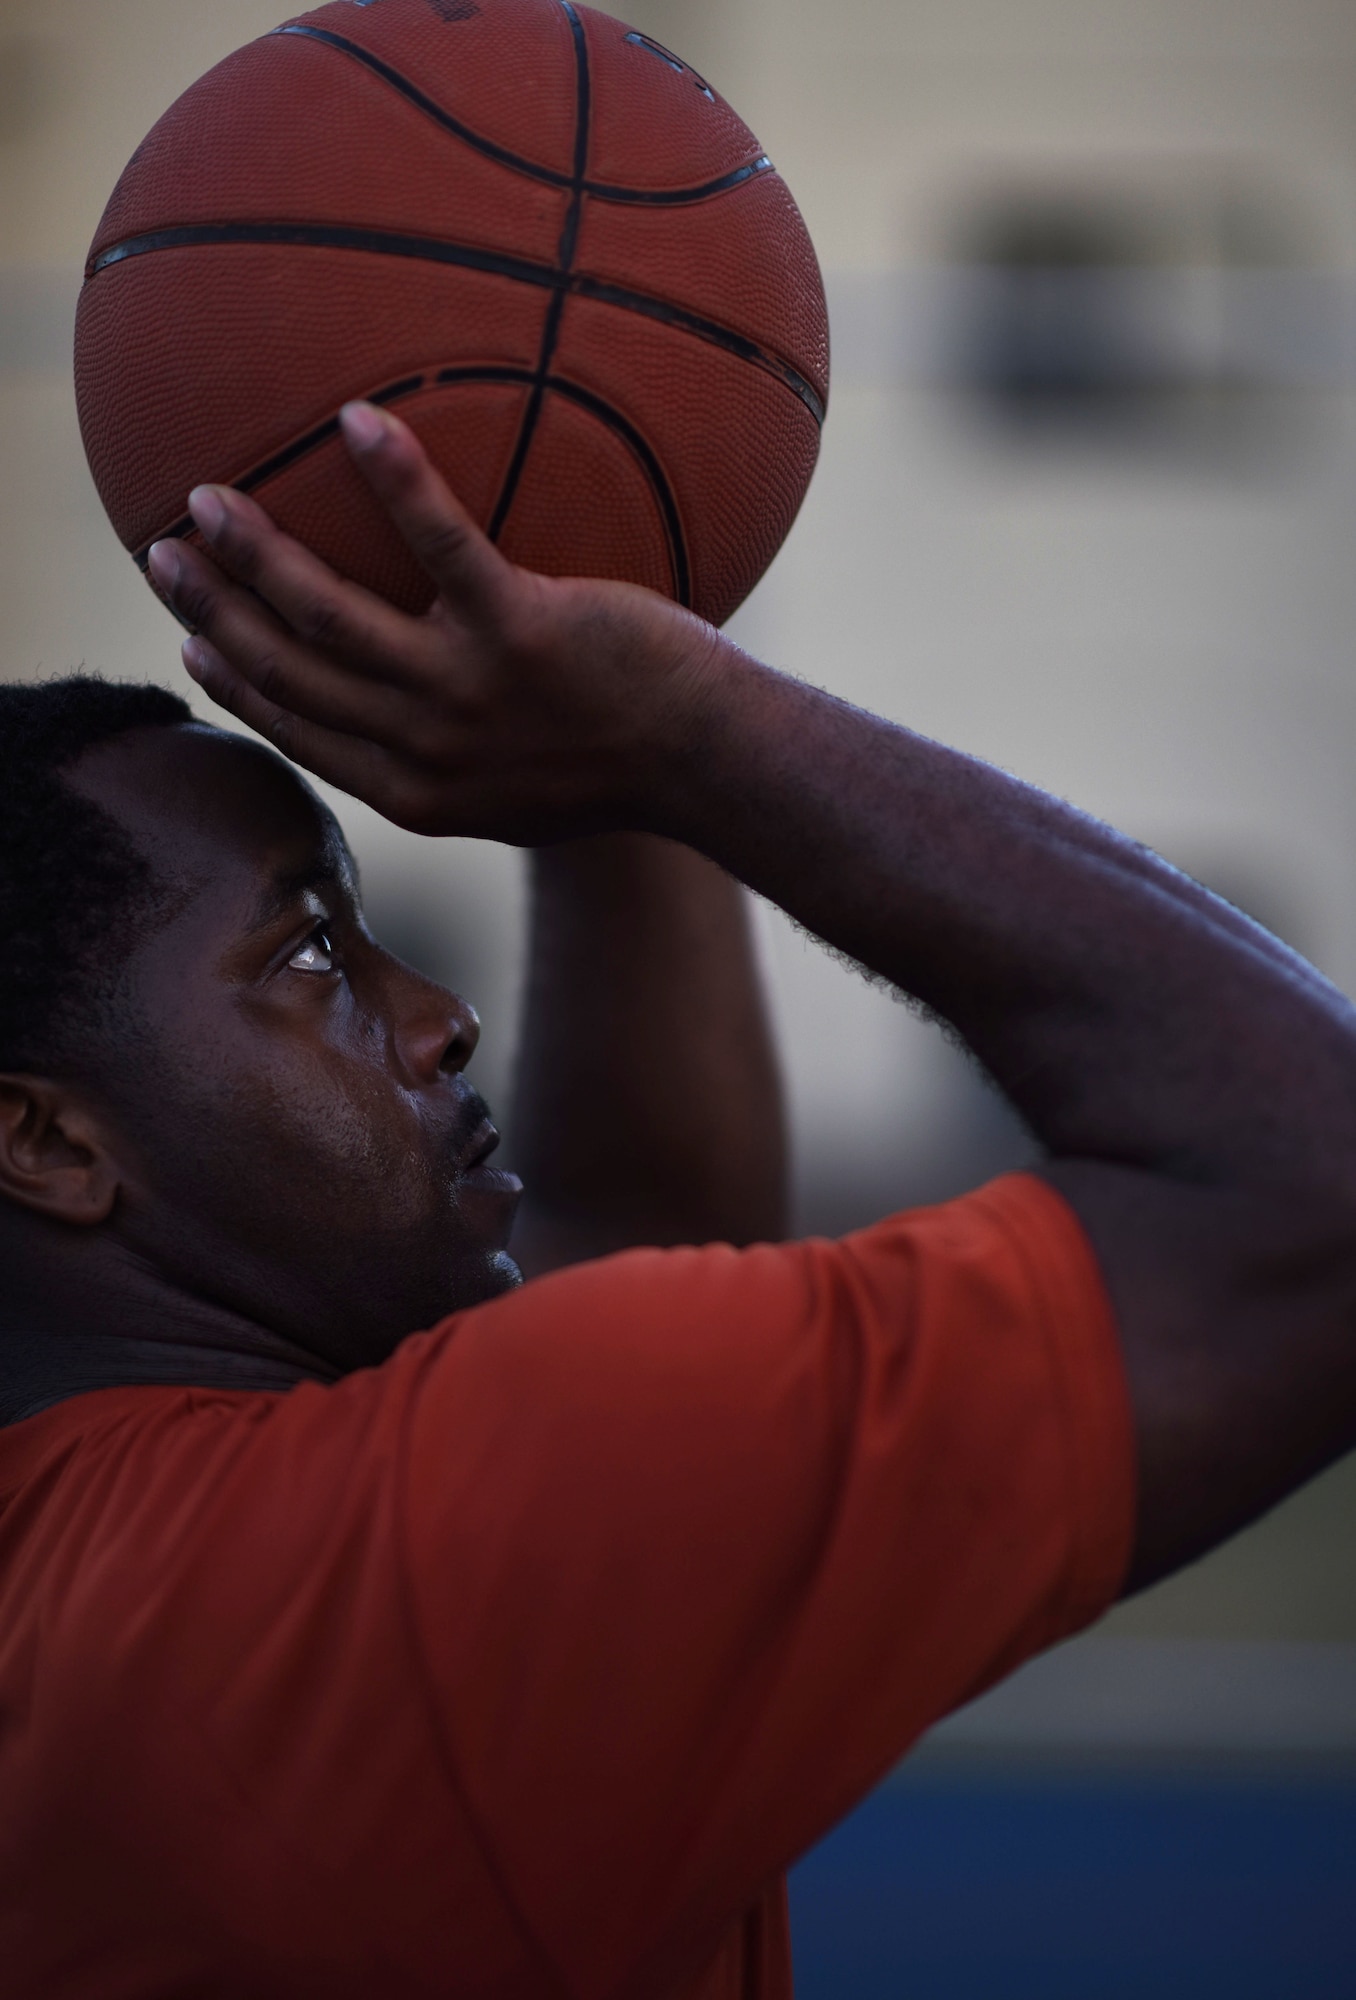 Airman 1st Class Daryl Parker, 608th Air Operations Center offensive duty technician, lines up his shot at Barksdale Air Force Base, La., Oct. 12, 2016. Parker was 1 of 29 Airmen selected to try out for the All-Air Force Men’s Basketball Team. (U.S. Air Force photo/Senior Airman Damon Kasberg)